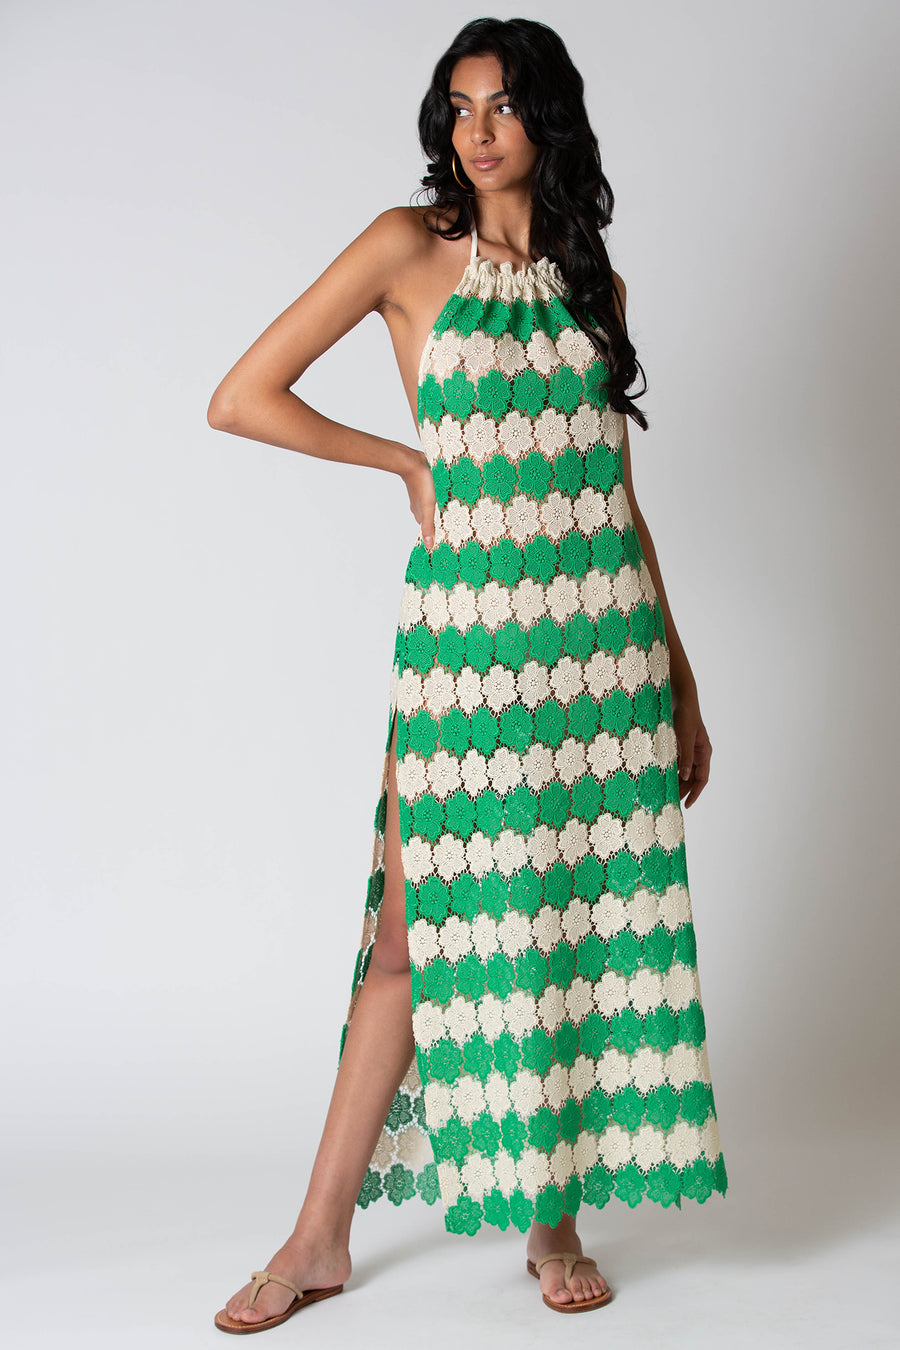 This is a photo of a woman posing in a green and ivory lace dress.